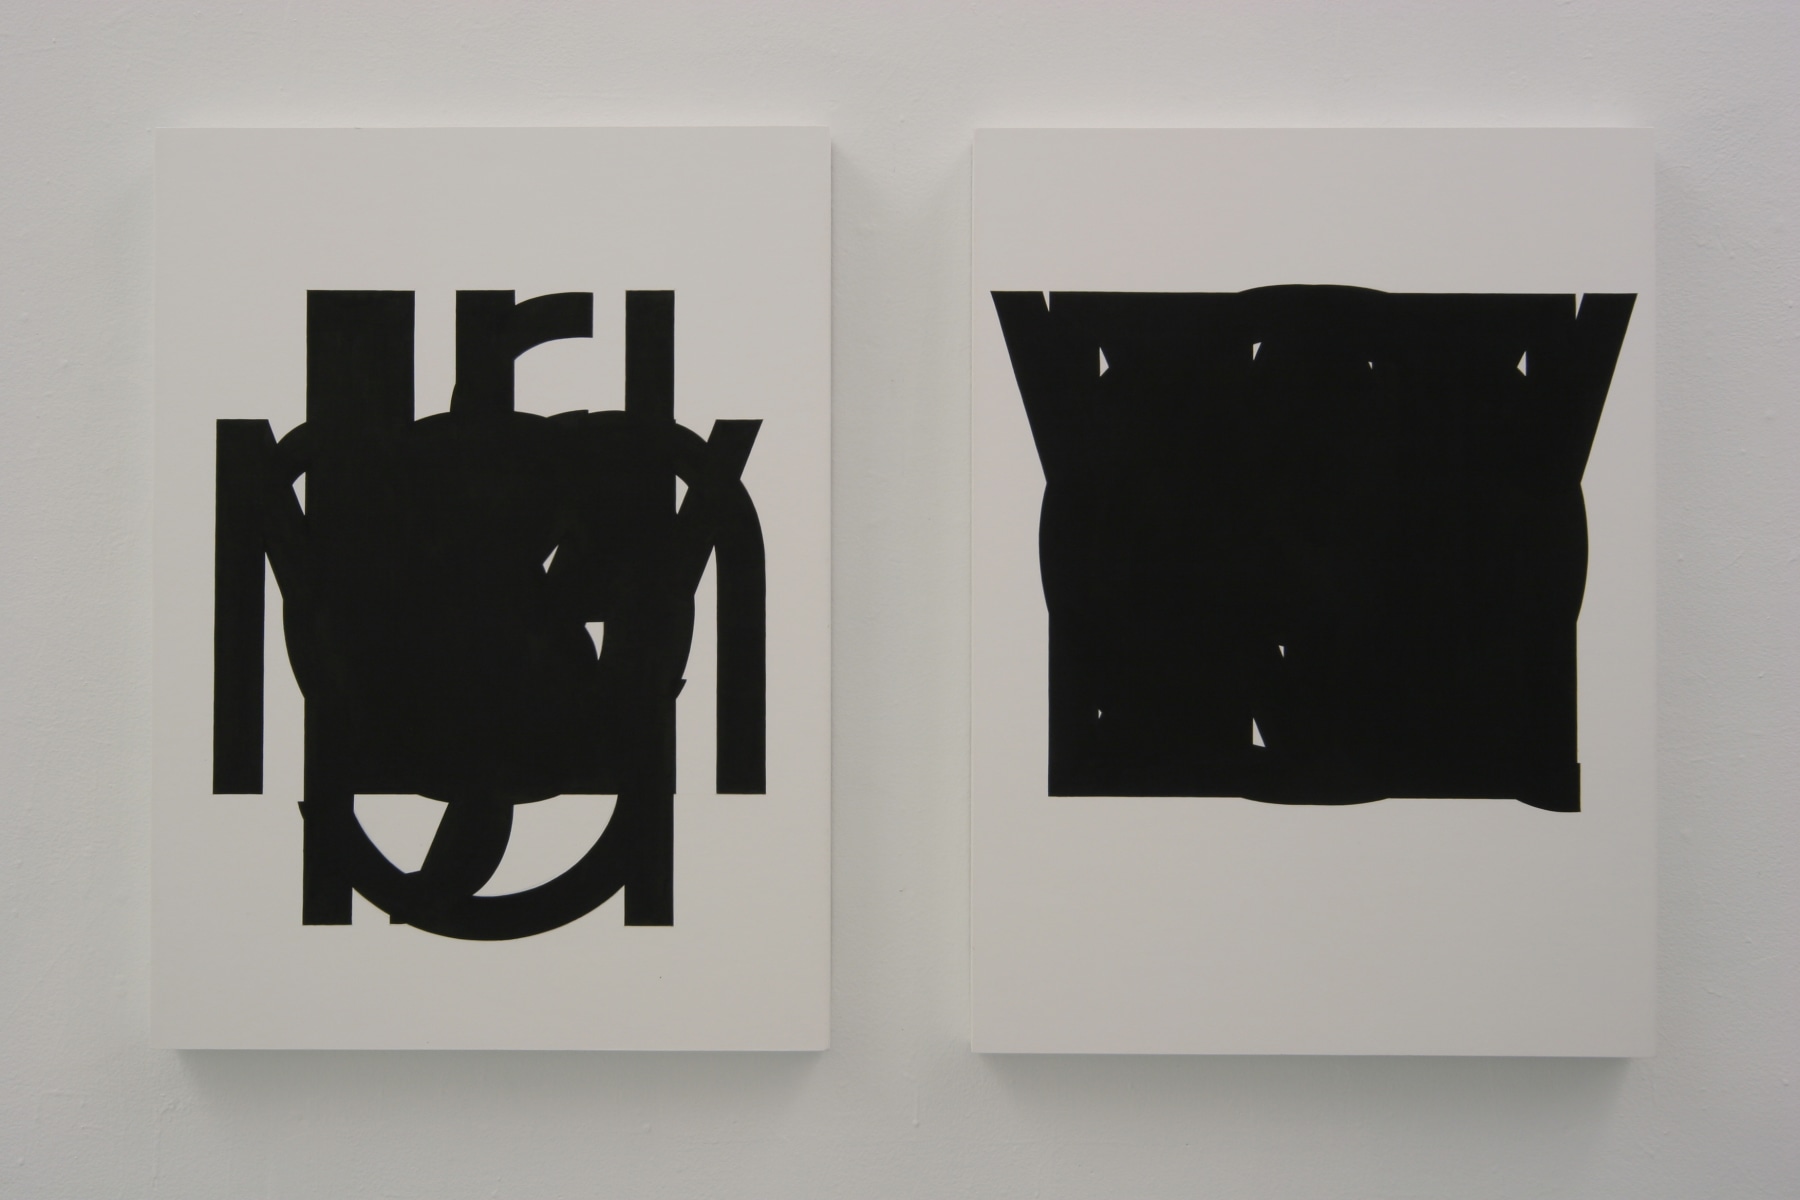 Tauba Auerbach, framed pieces with wording obscured by black blocking